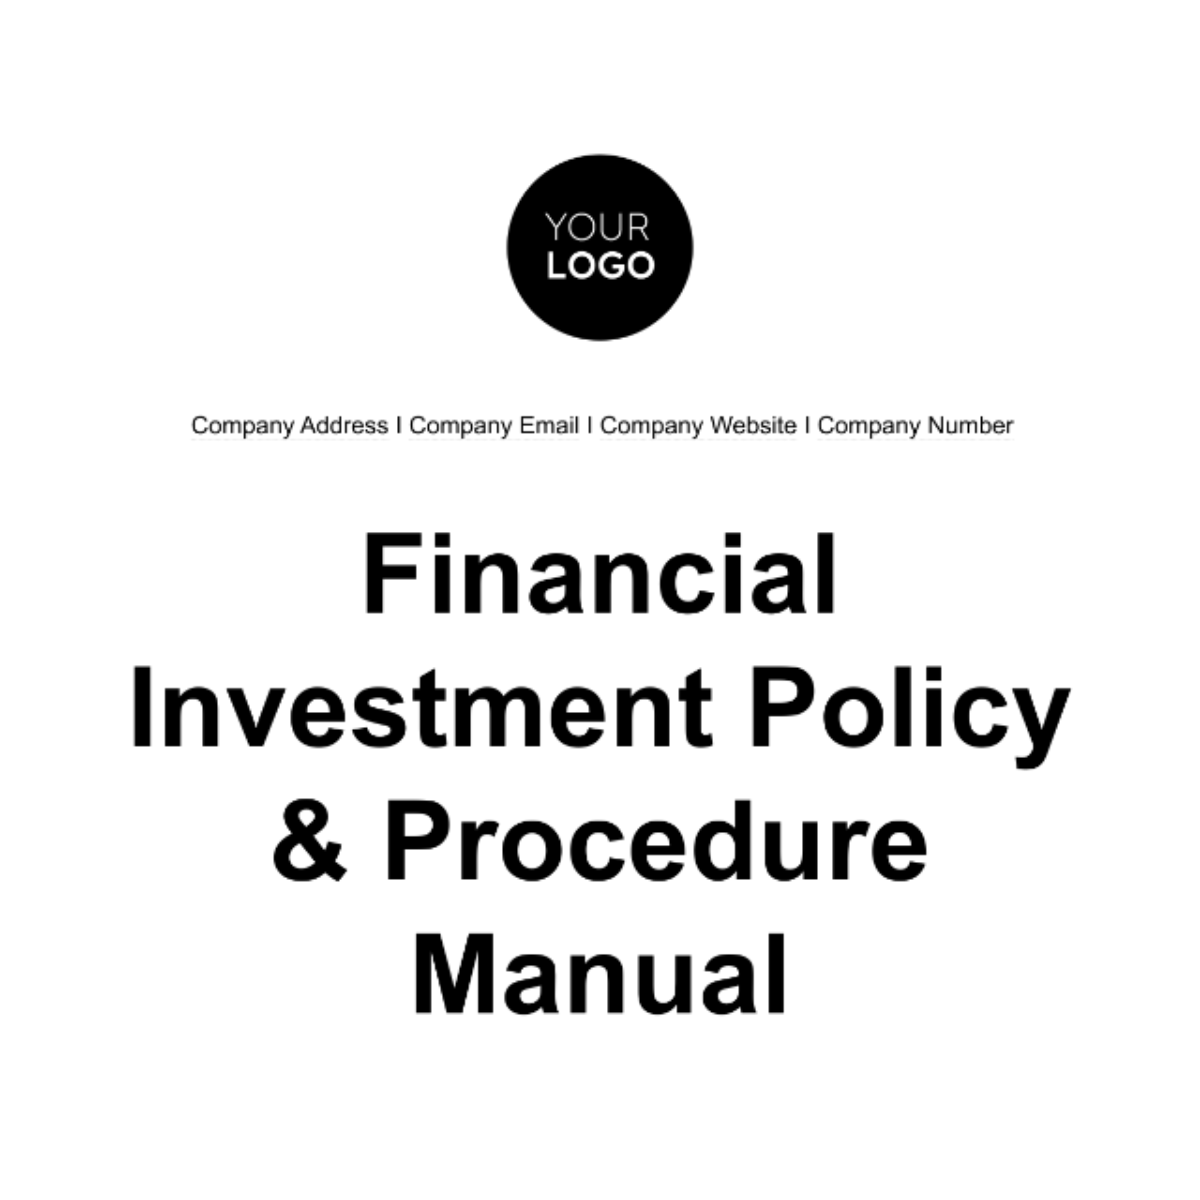 Financial Investment Policy & Procedure Manual Template